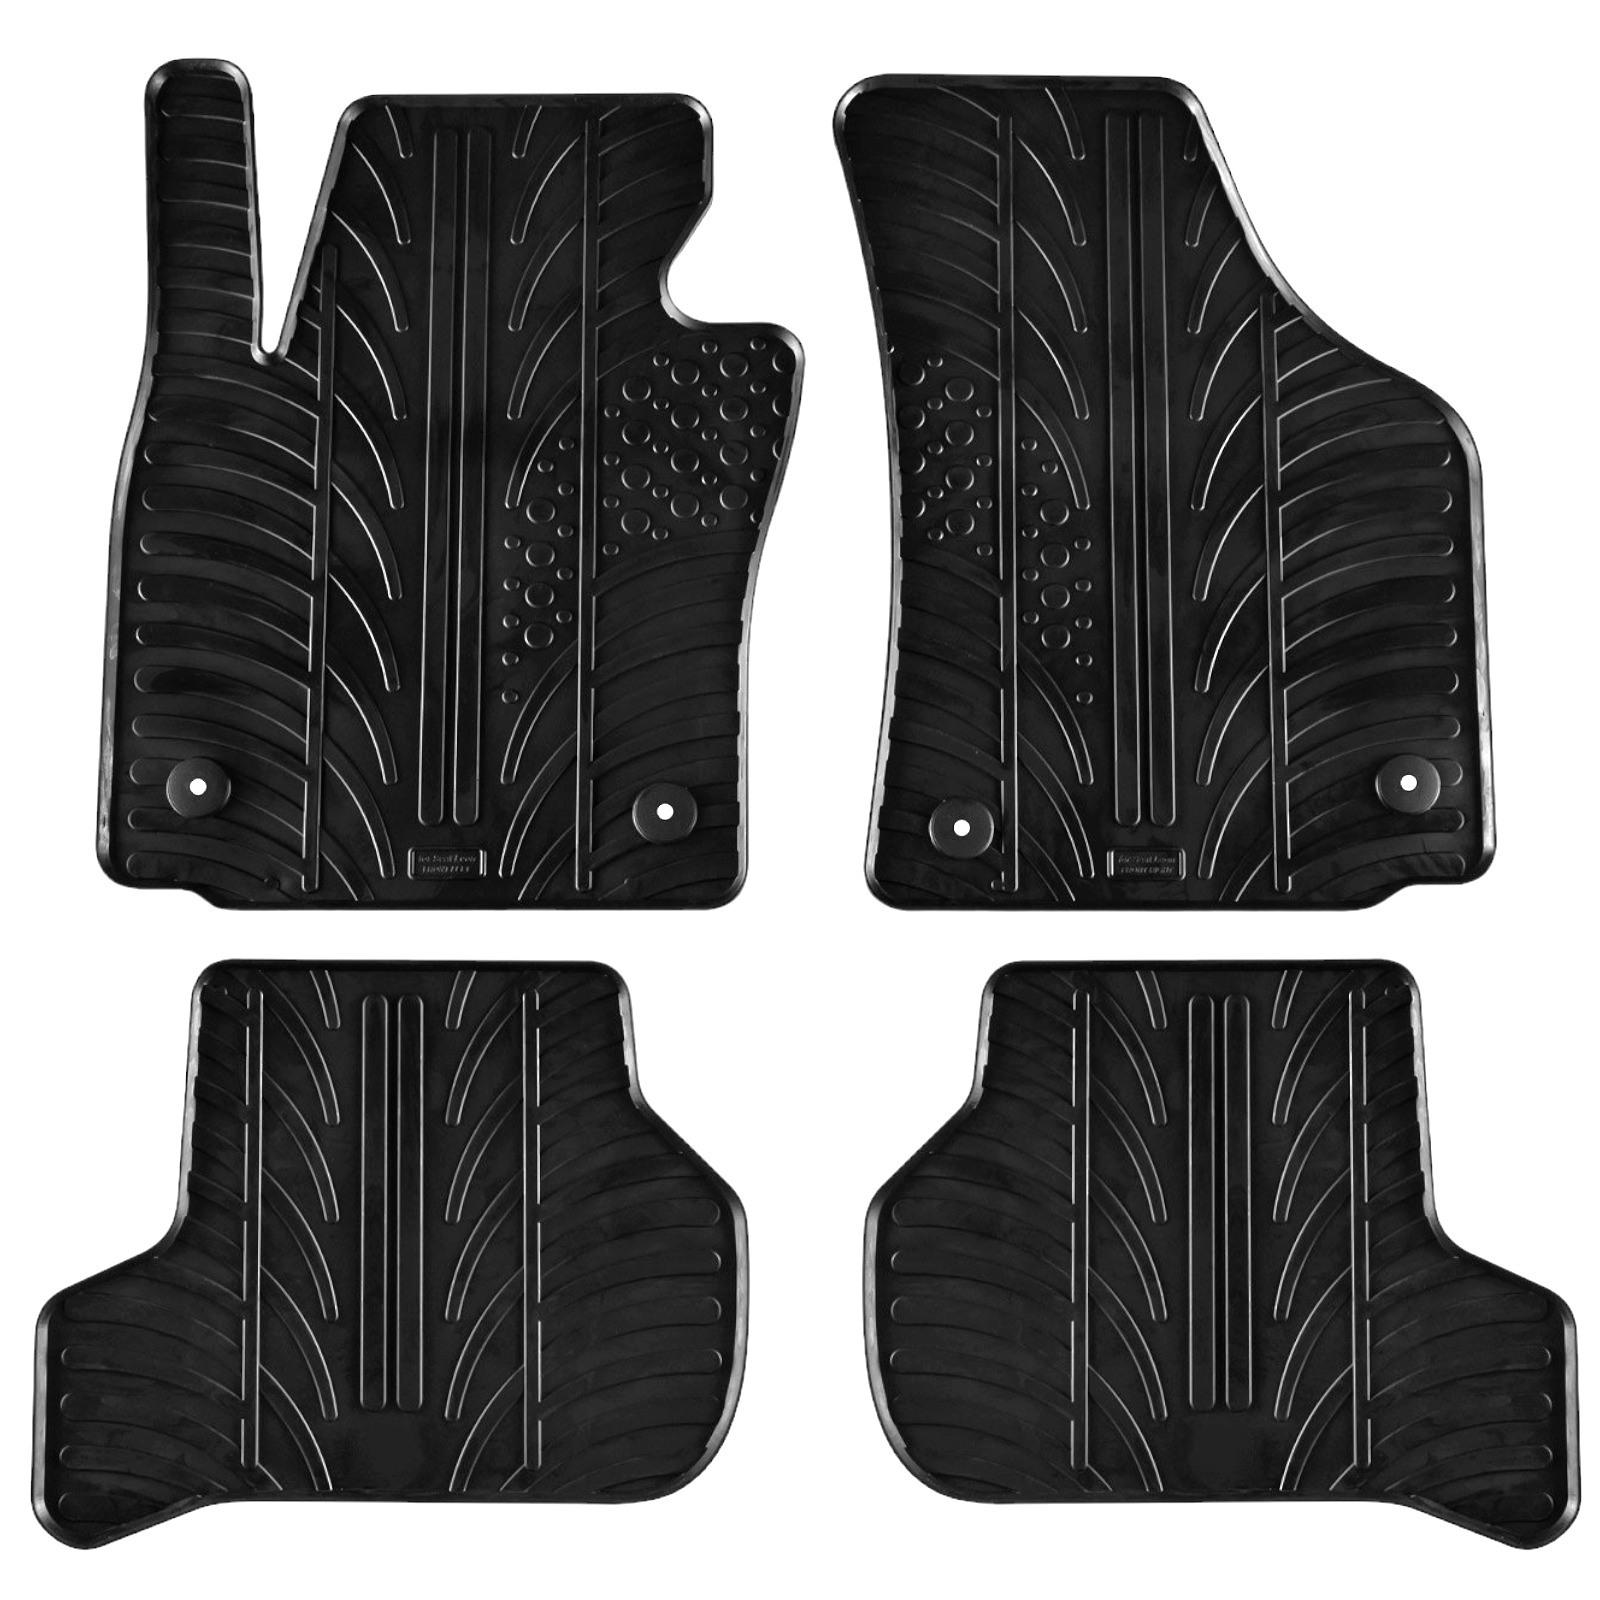 For Seat Leon 2005-2012 Car Floor Mats Rubber All Weather Heavy Duty Liners New